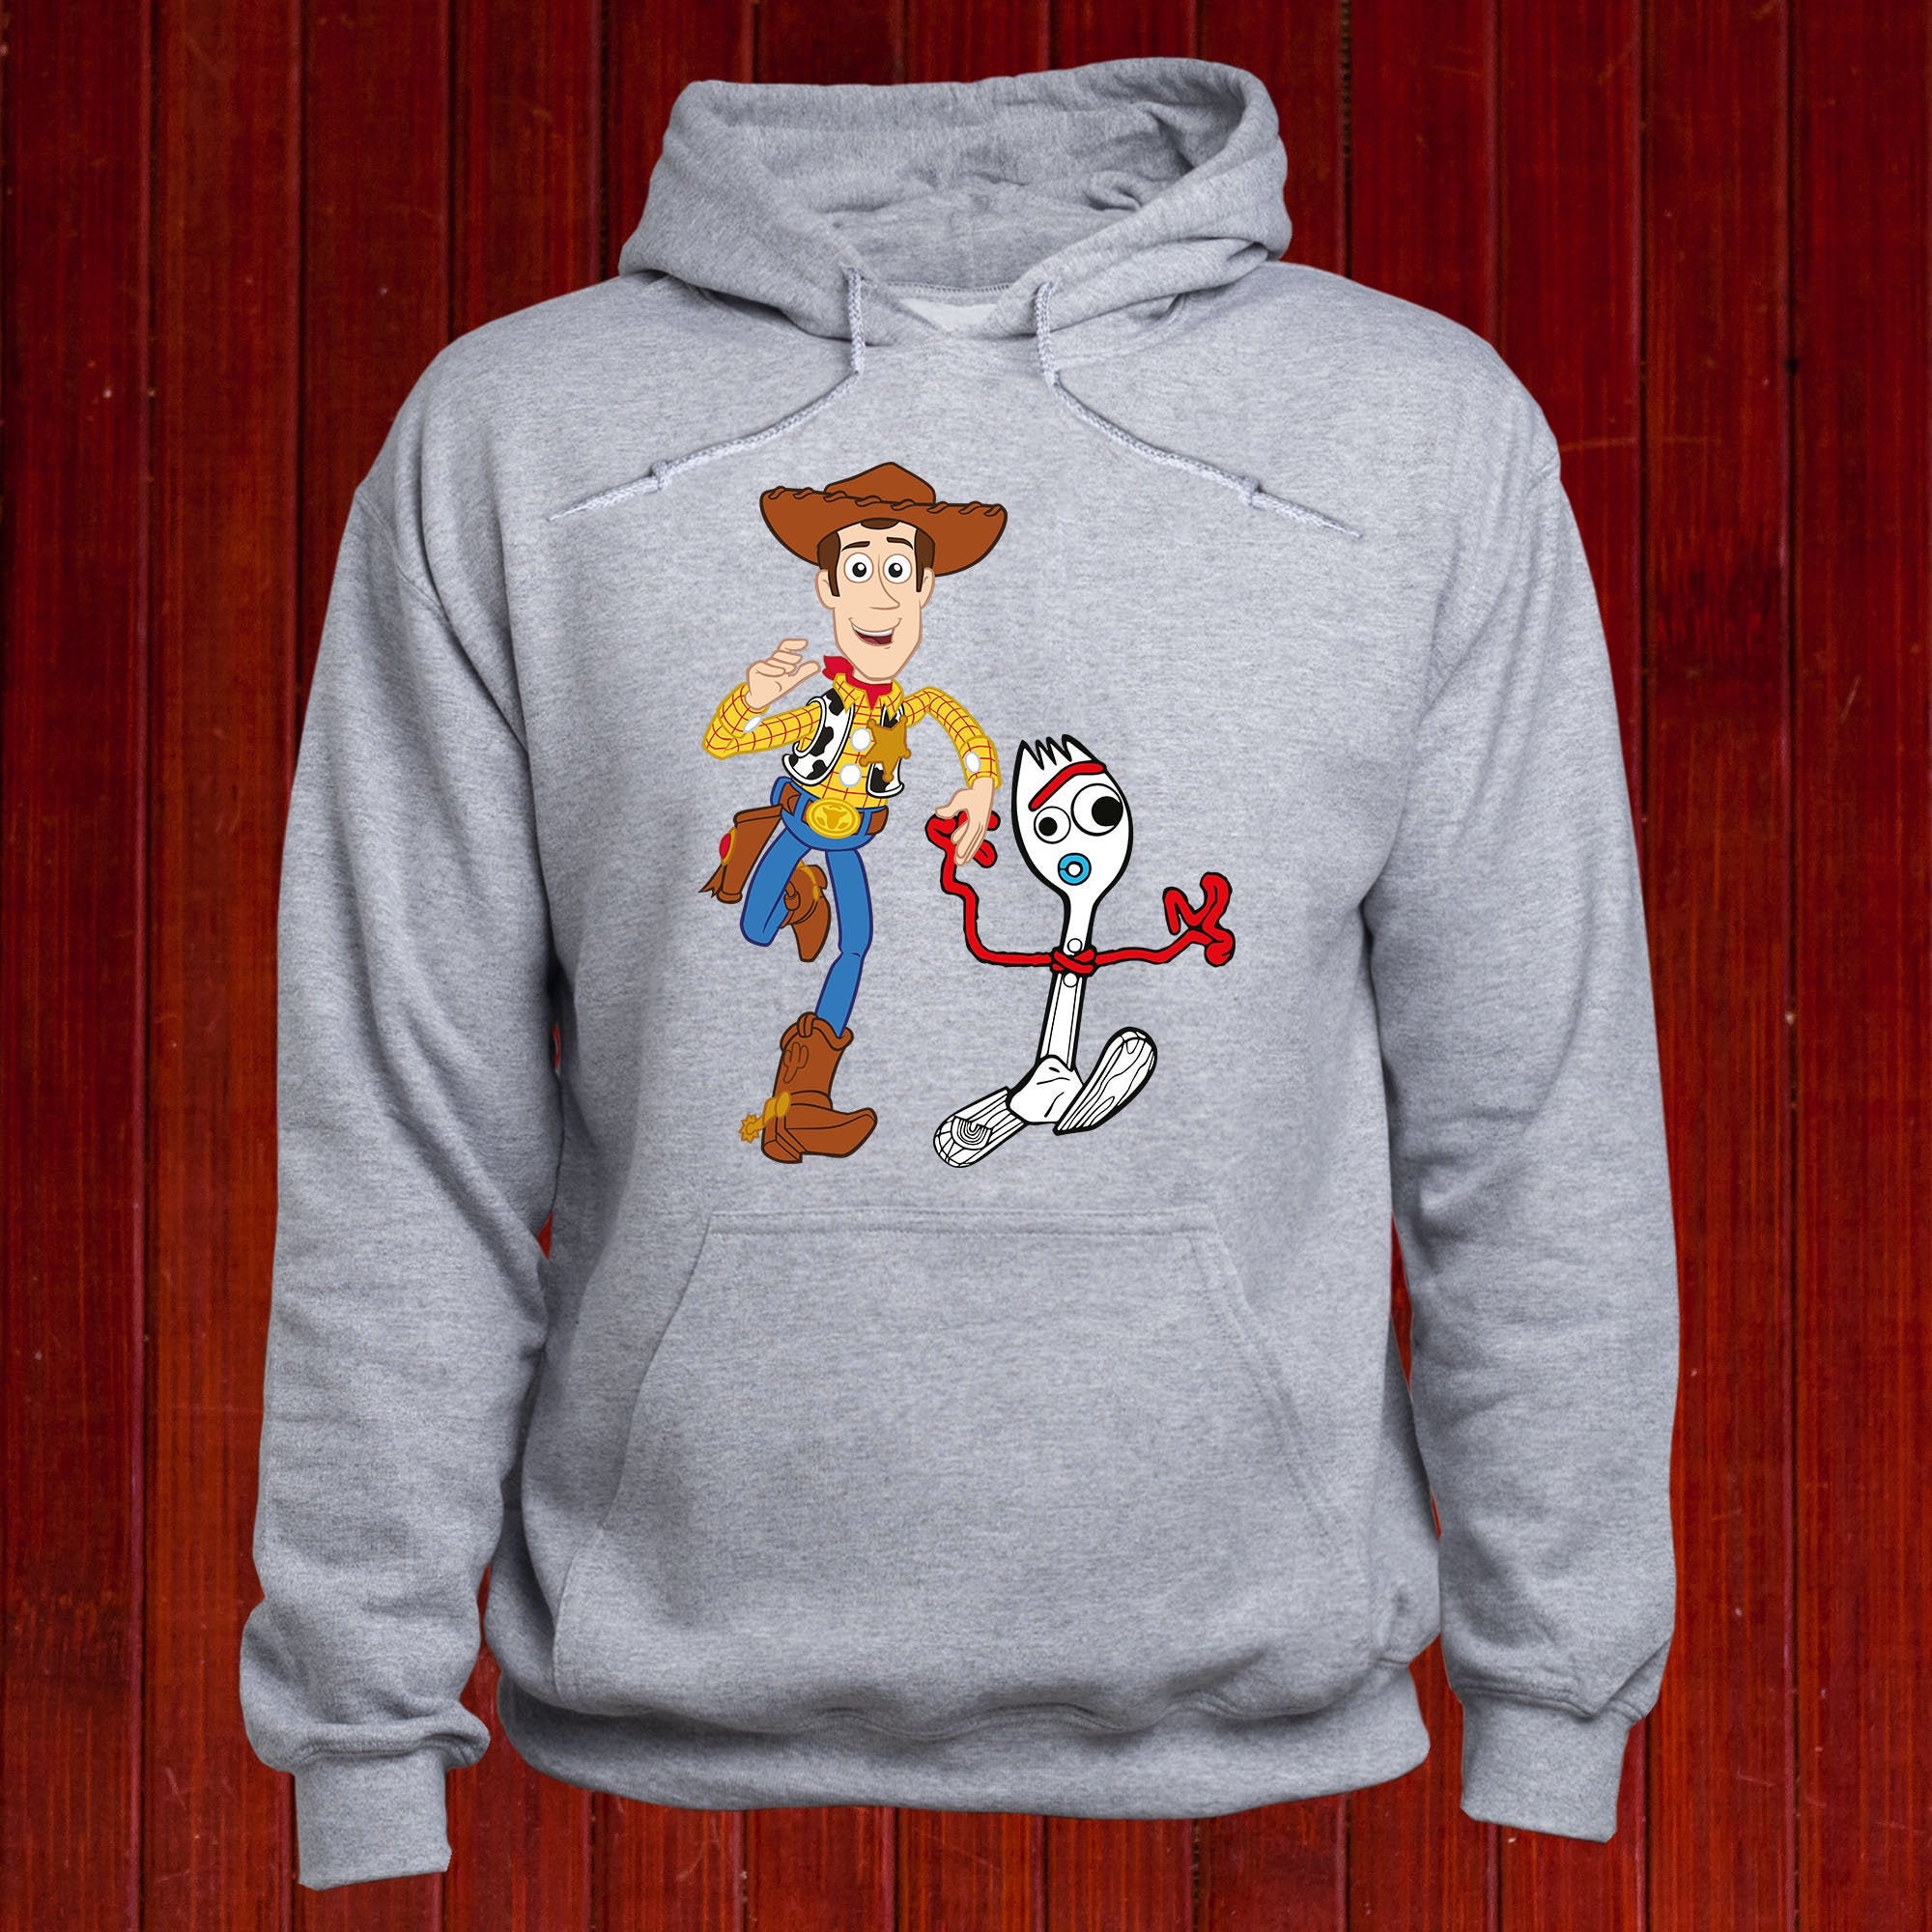 Woody und Forky Sweatshirt / Woody Hoodie / Forky Pullover / Toy Story  Pullover / Spielzeug Geschichte Freunde Pullover / Cowbay Hoody / Spork  Pullover / T80 - .de